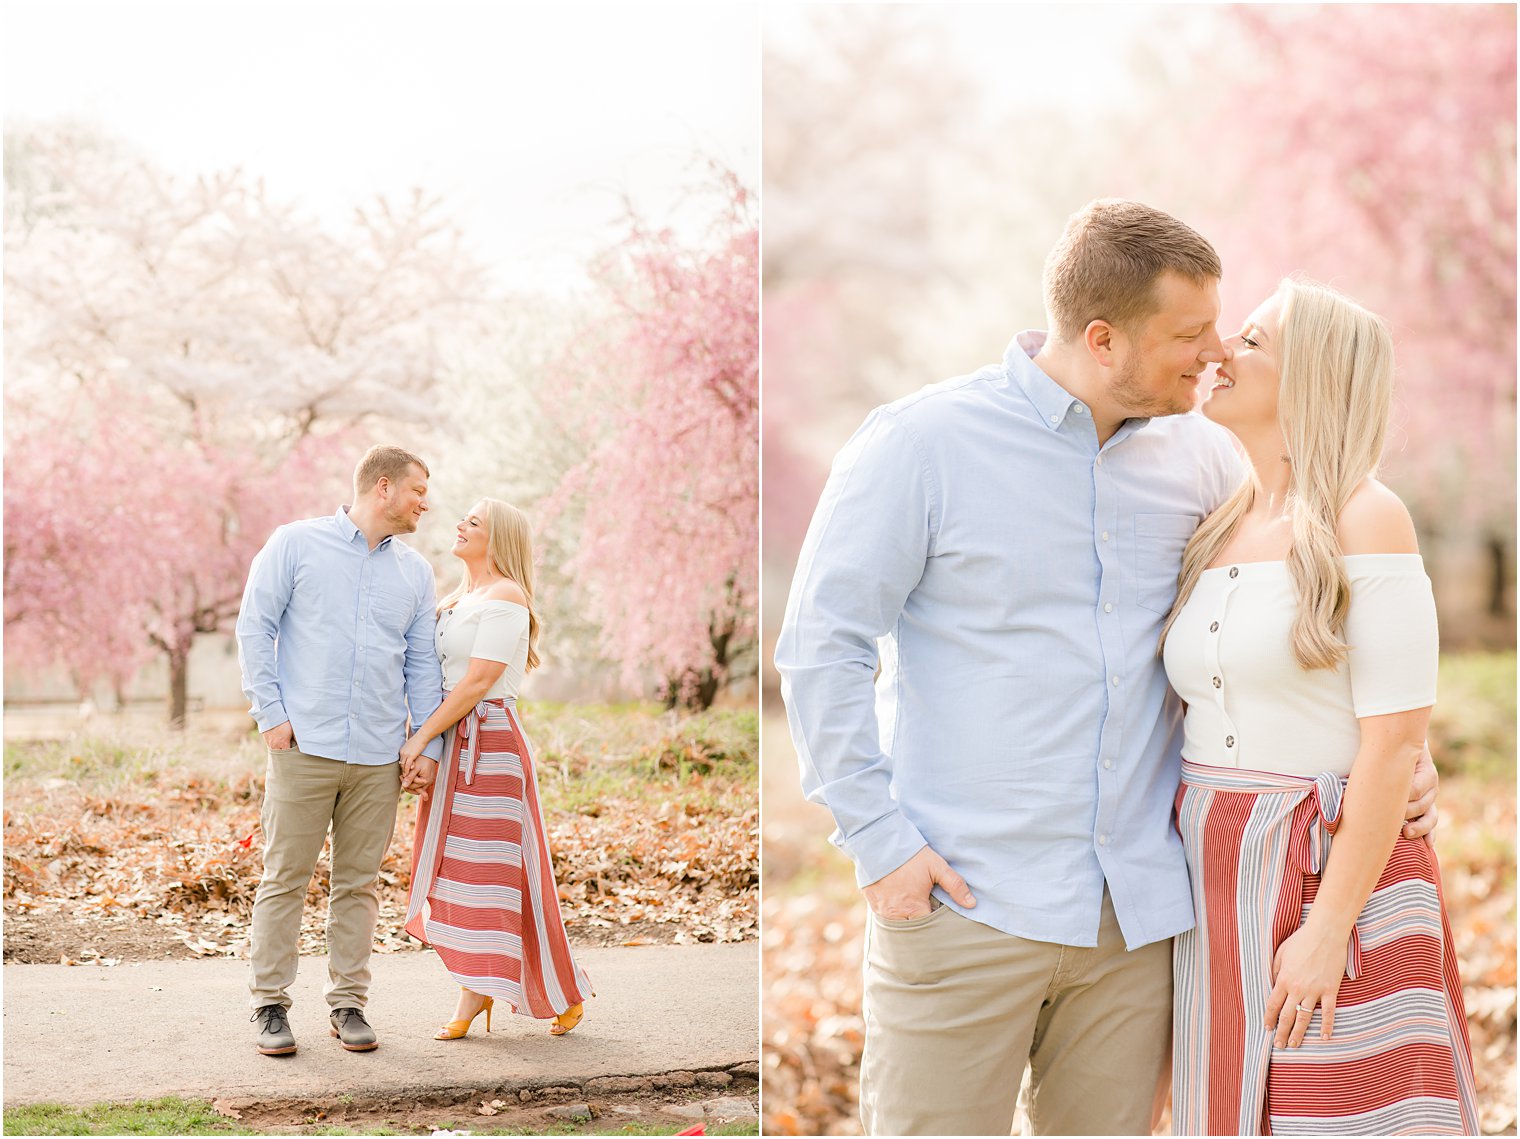 Spring Cherry Blossom Engagement session photos at Branch Brook Park by Idalia Photography